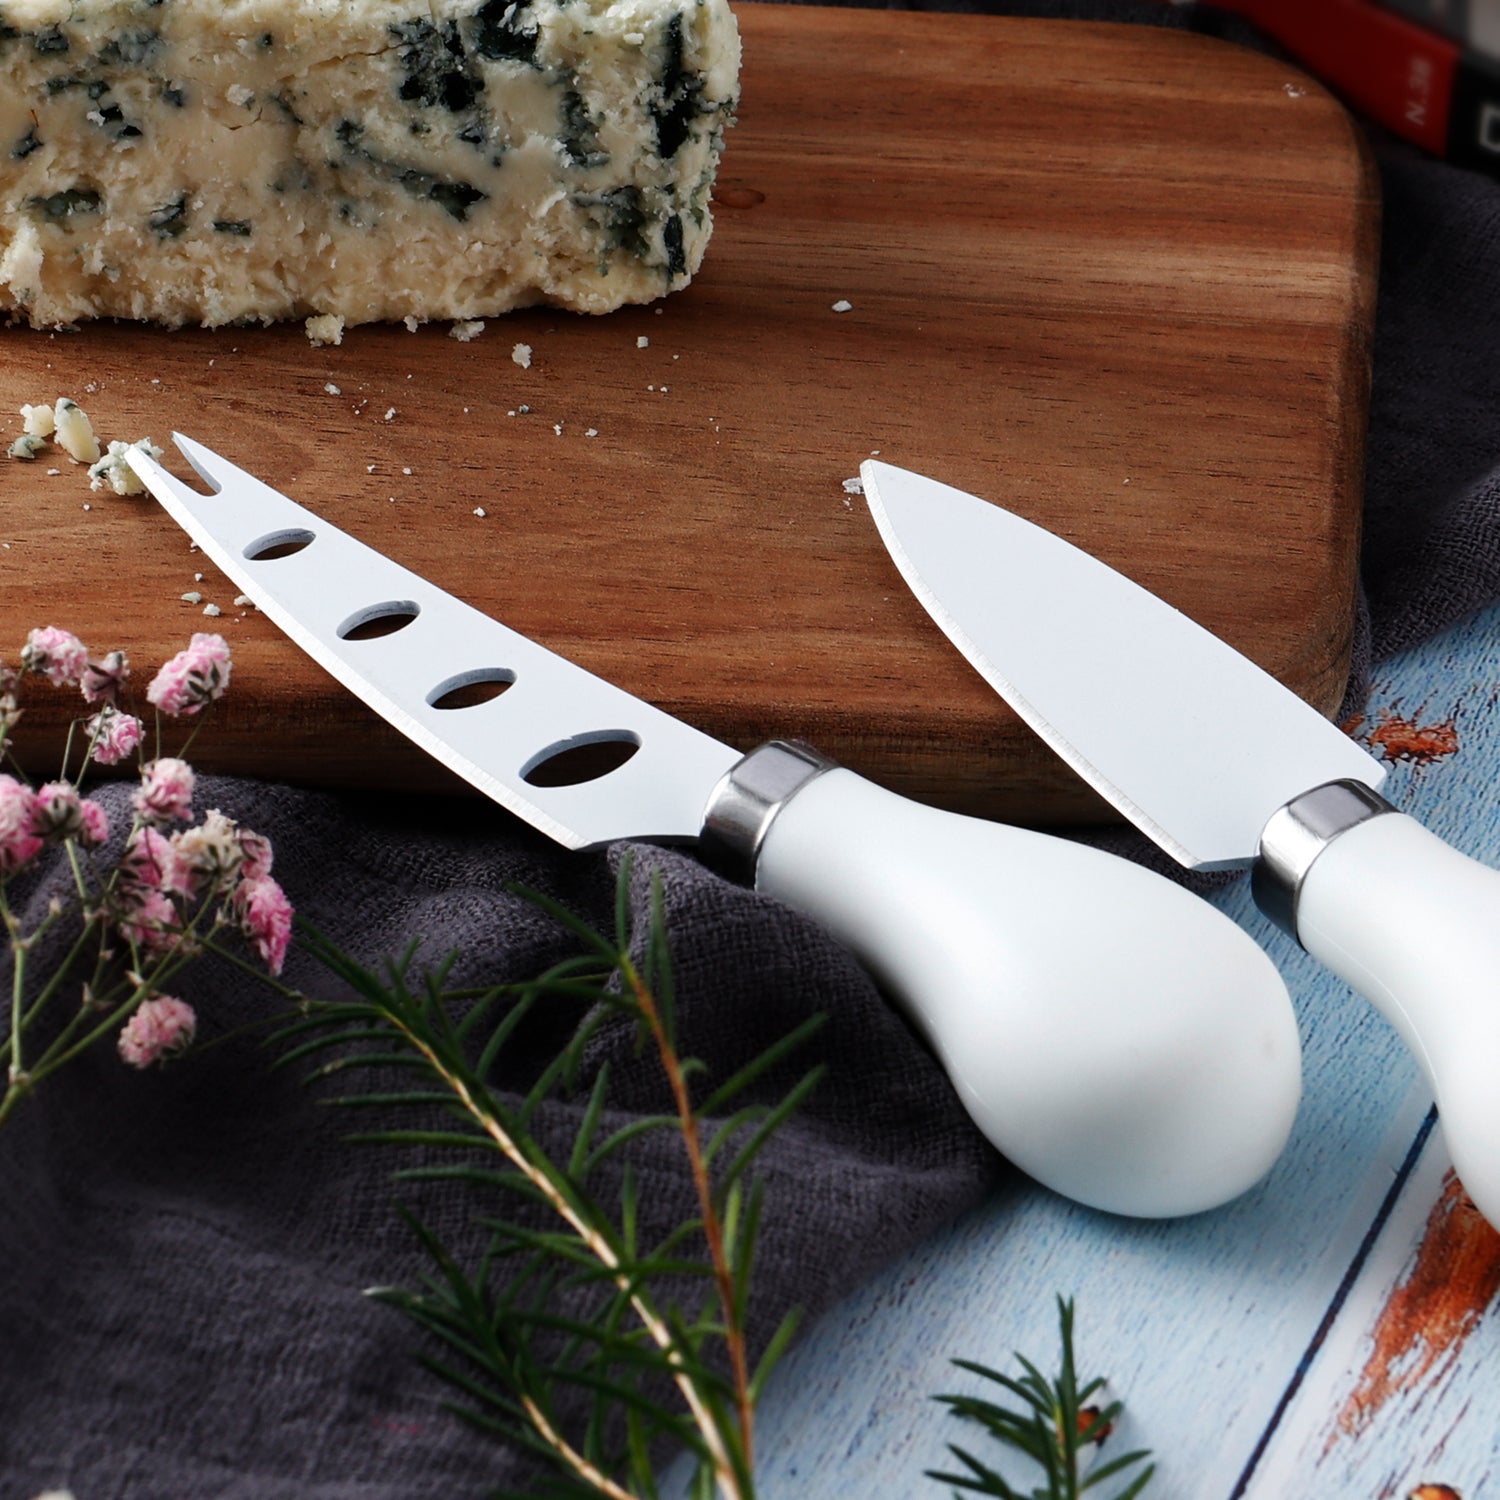 hecef Cheese Knife Set of 4, Non-Stick Coated Gift Set for Christmas, Anniversary, Party, Housewarming, Picnic, Birthdays, Wedding(Black / White/ Multicolor/ Beige) - Hecef Kitchen